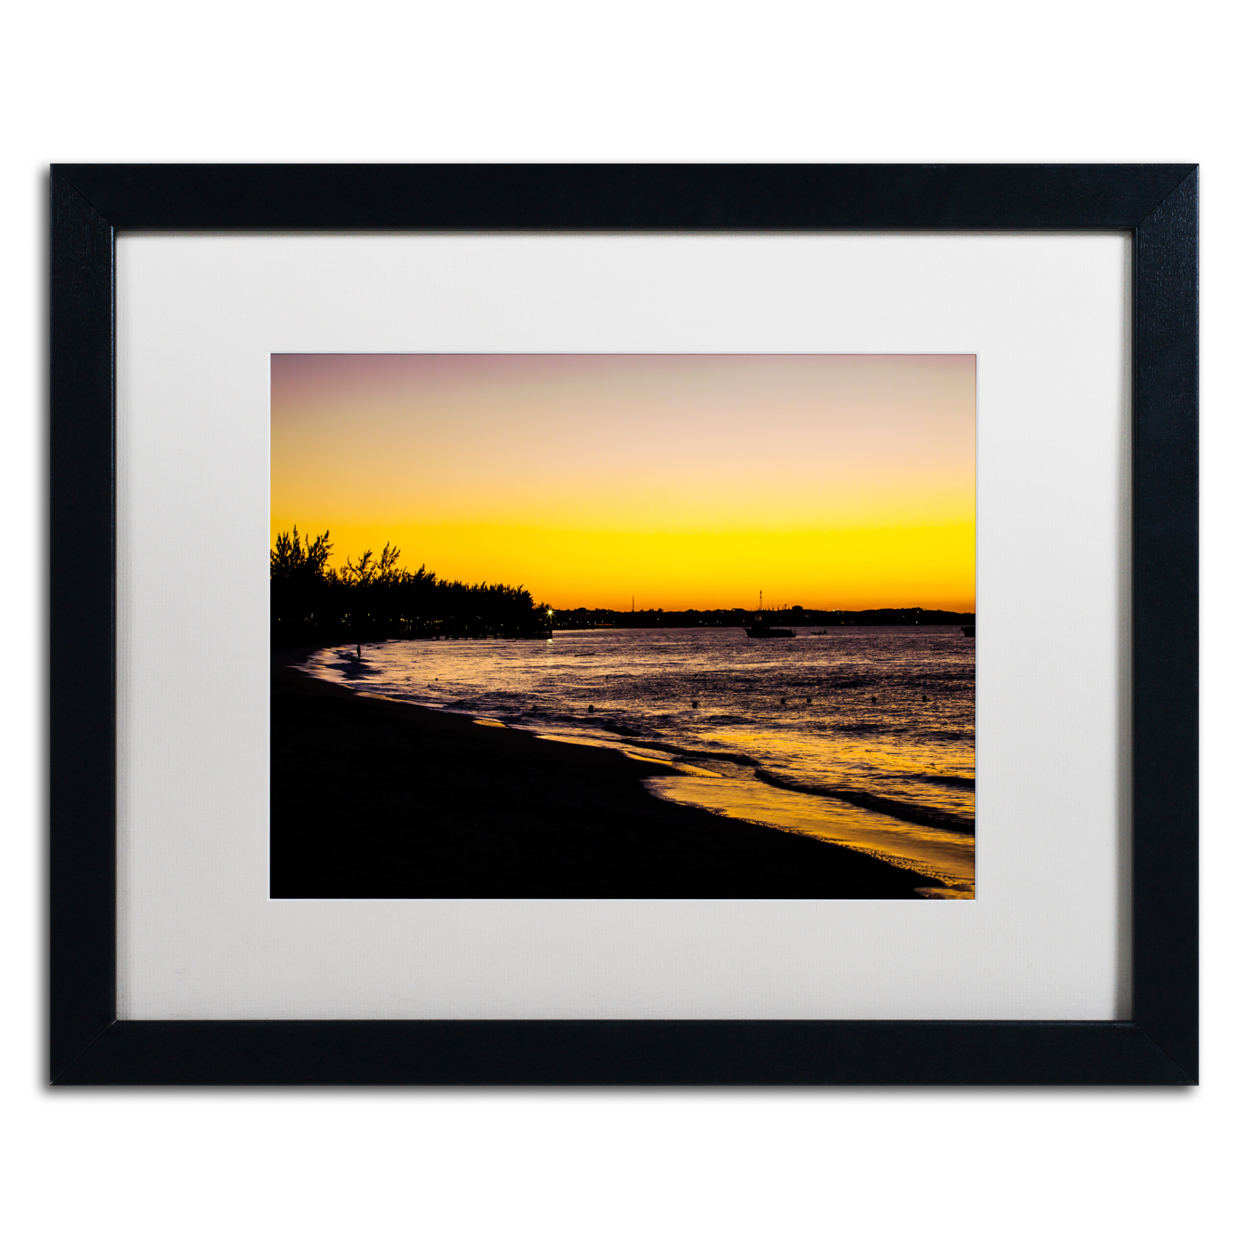 Yale Gurney 'Deluxe Sunset' Black Wooden Framed Art 18 X 22 Inches